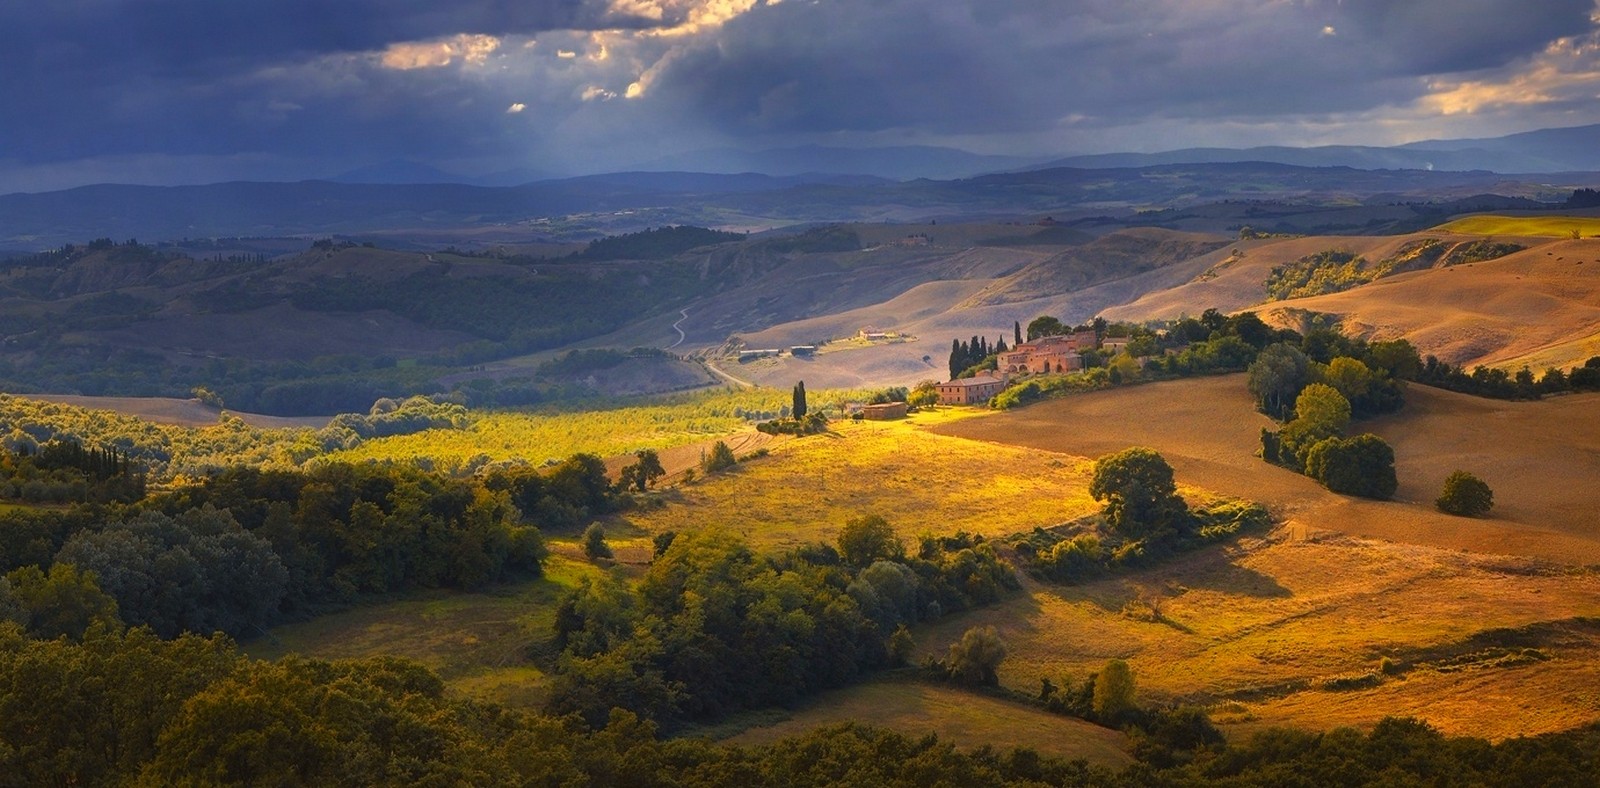 General 1600x788 nature landscape Tuscany mountains forest sunlight field trees Italy